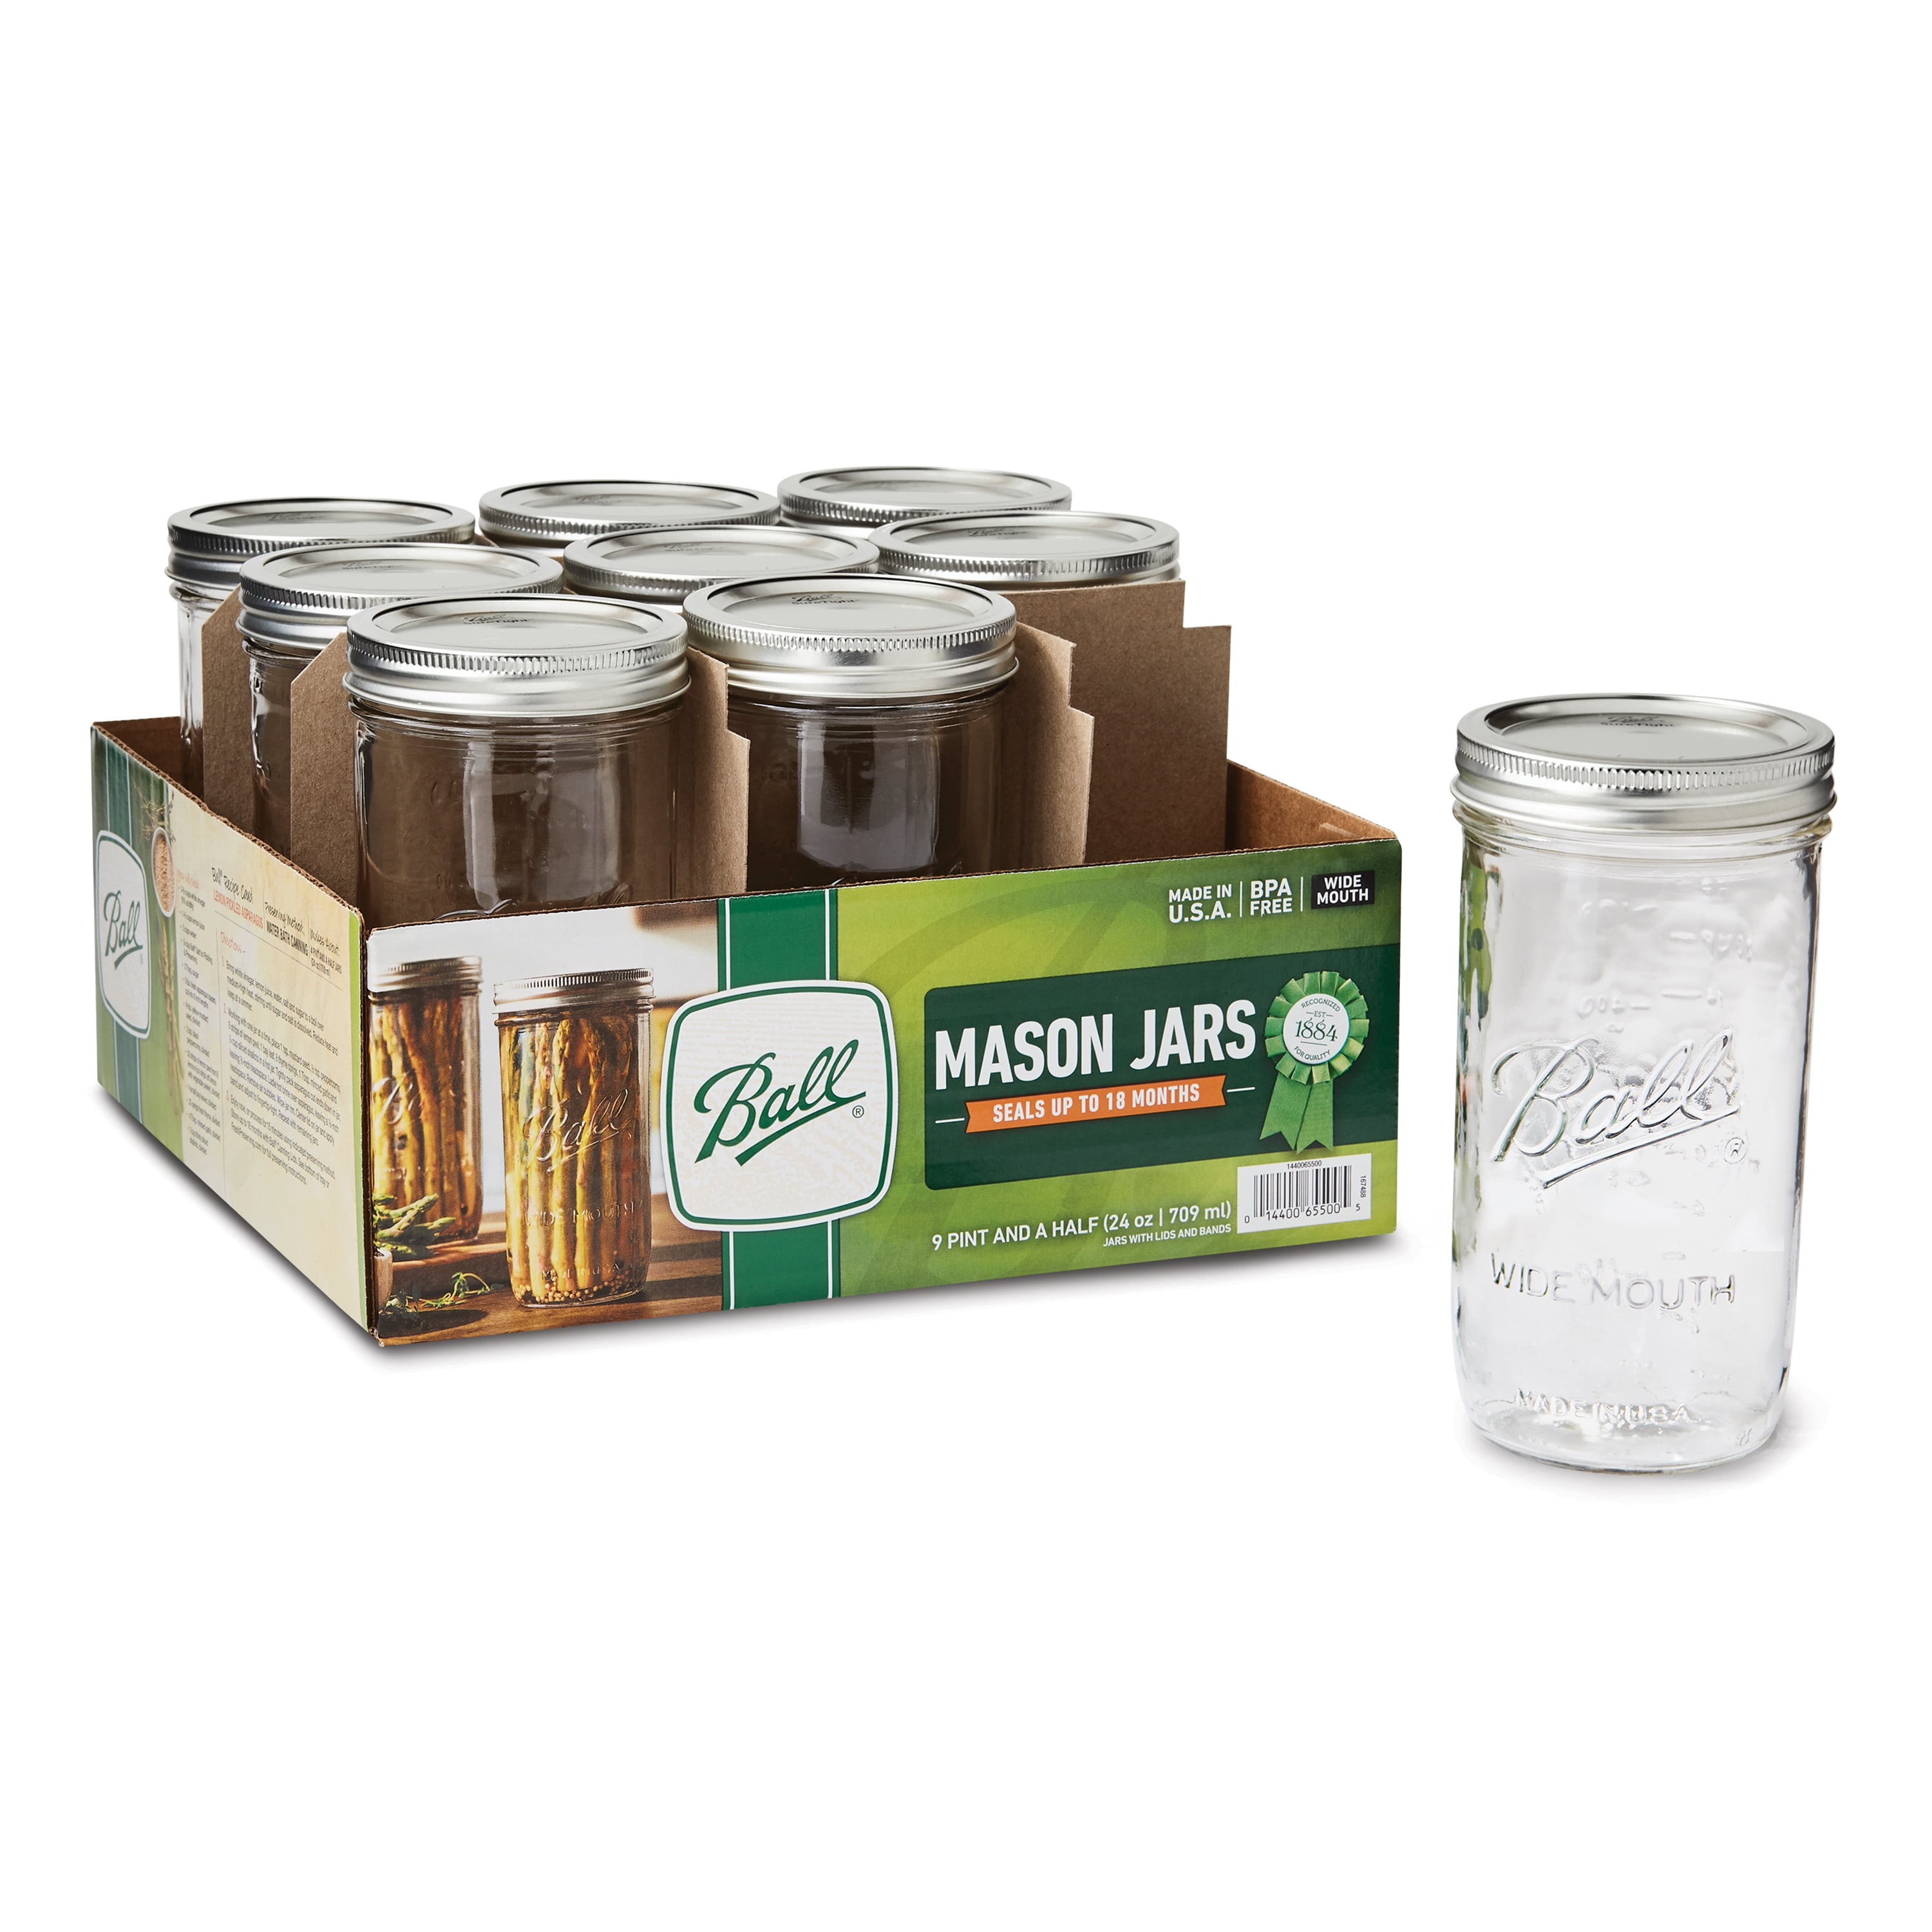 32 Ounces Set of 24 12 Count Ball Glass Mason Jar w/Lid & Band Wide Mouth